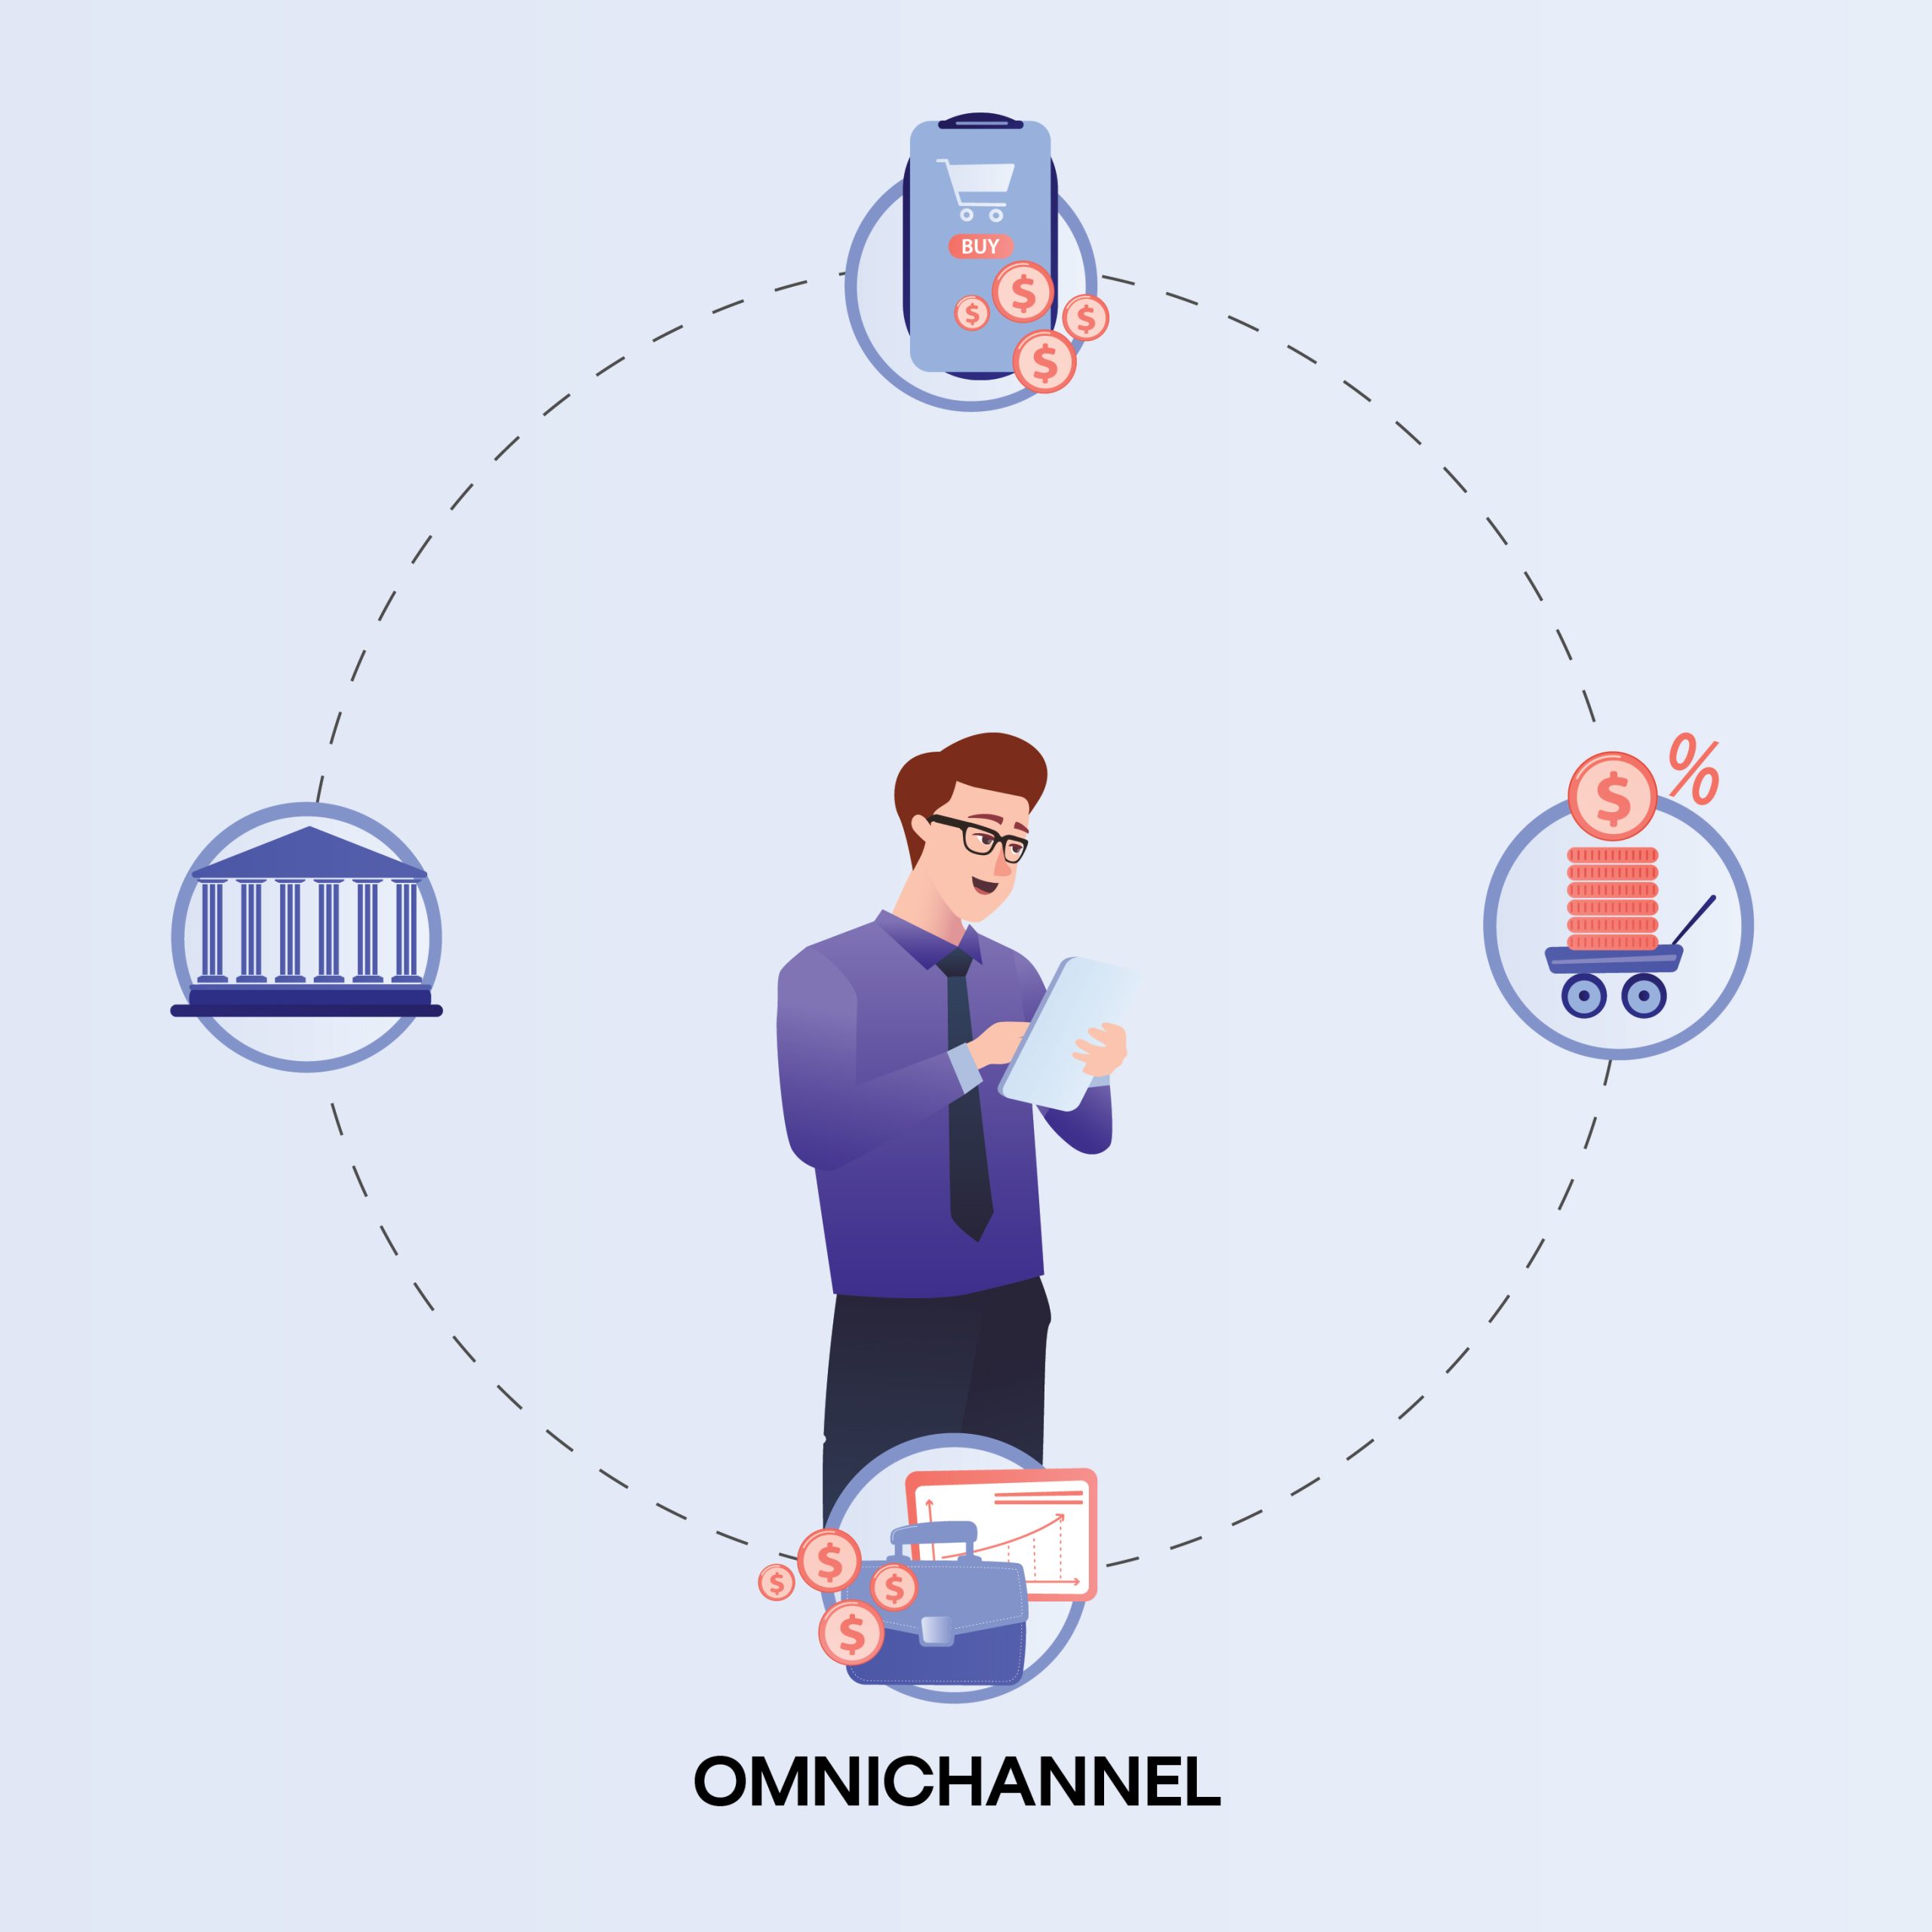 Illustration of omnichannel experience in banking"